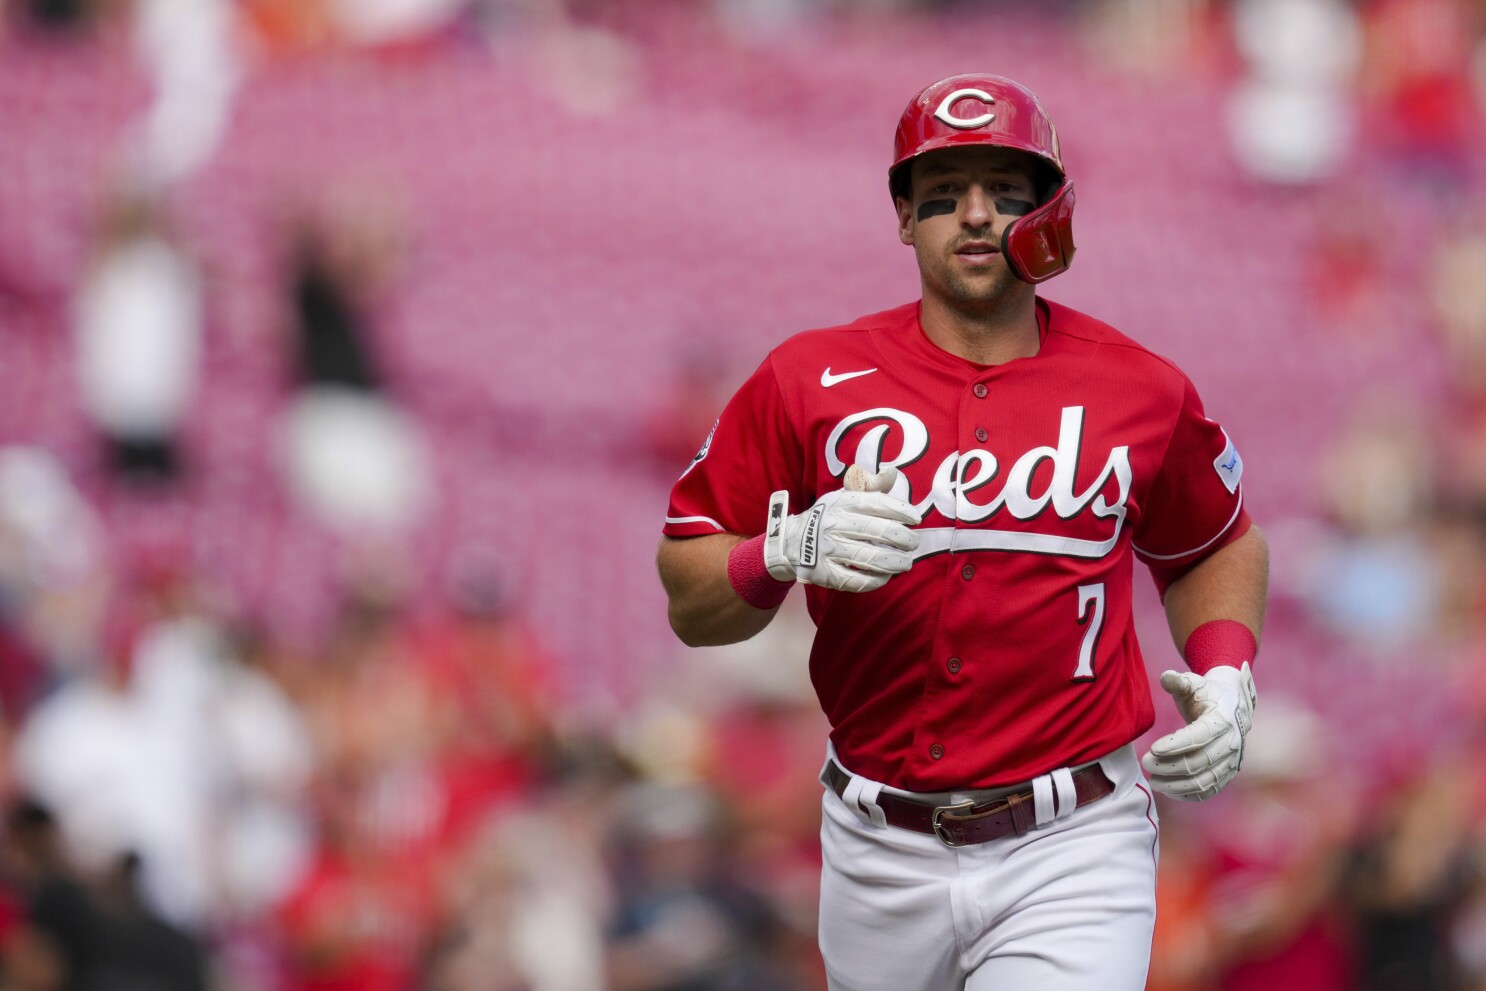 Steer's 3-run homer helps wild-card chasing Reds beat first-place Mariners  6-3